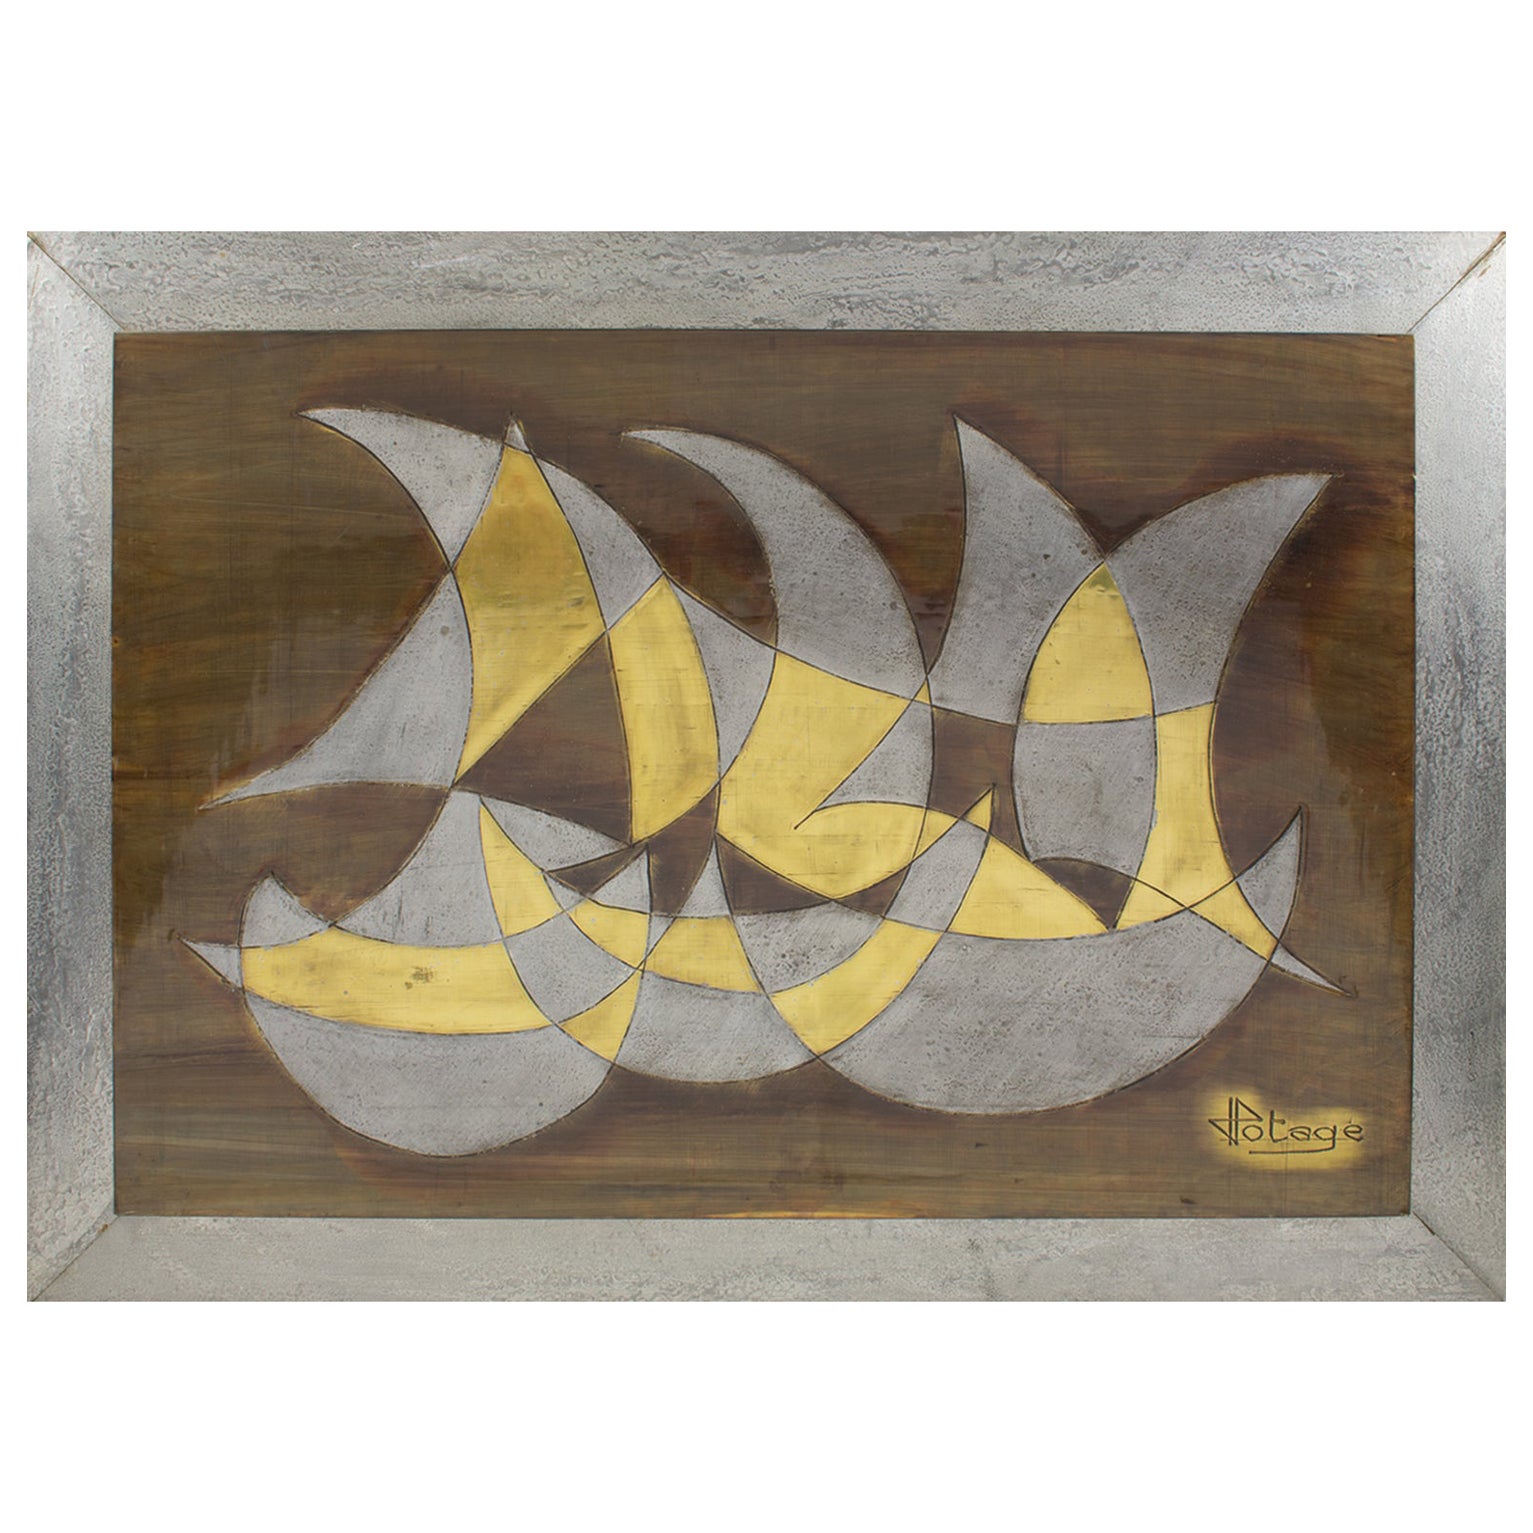 French Artist Jacques Potage Brutalist Metal Wall Art Sculpture Panel, 1970s For Sale